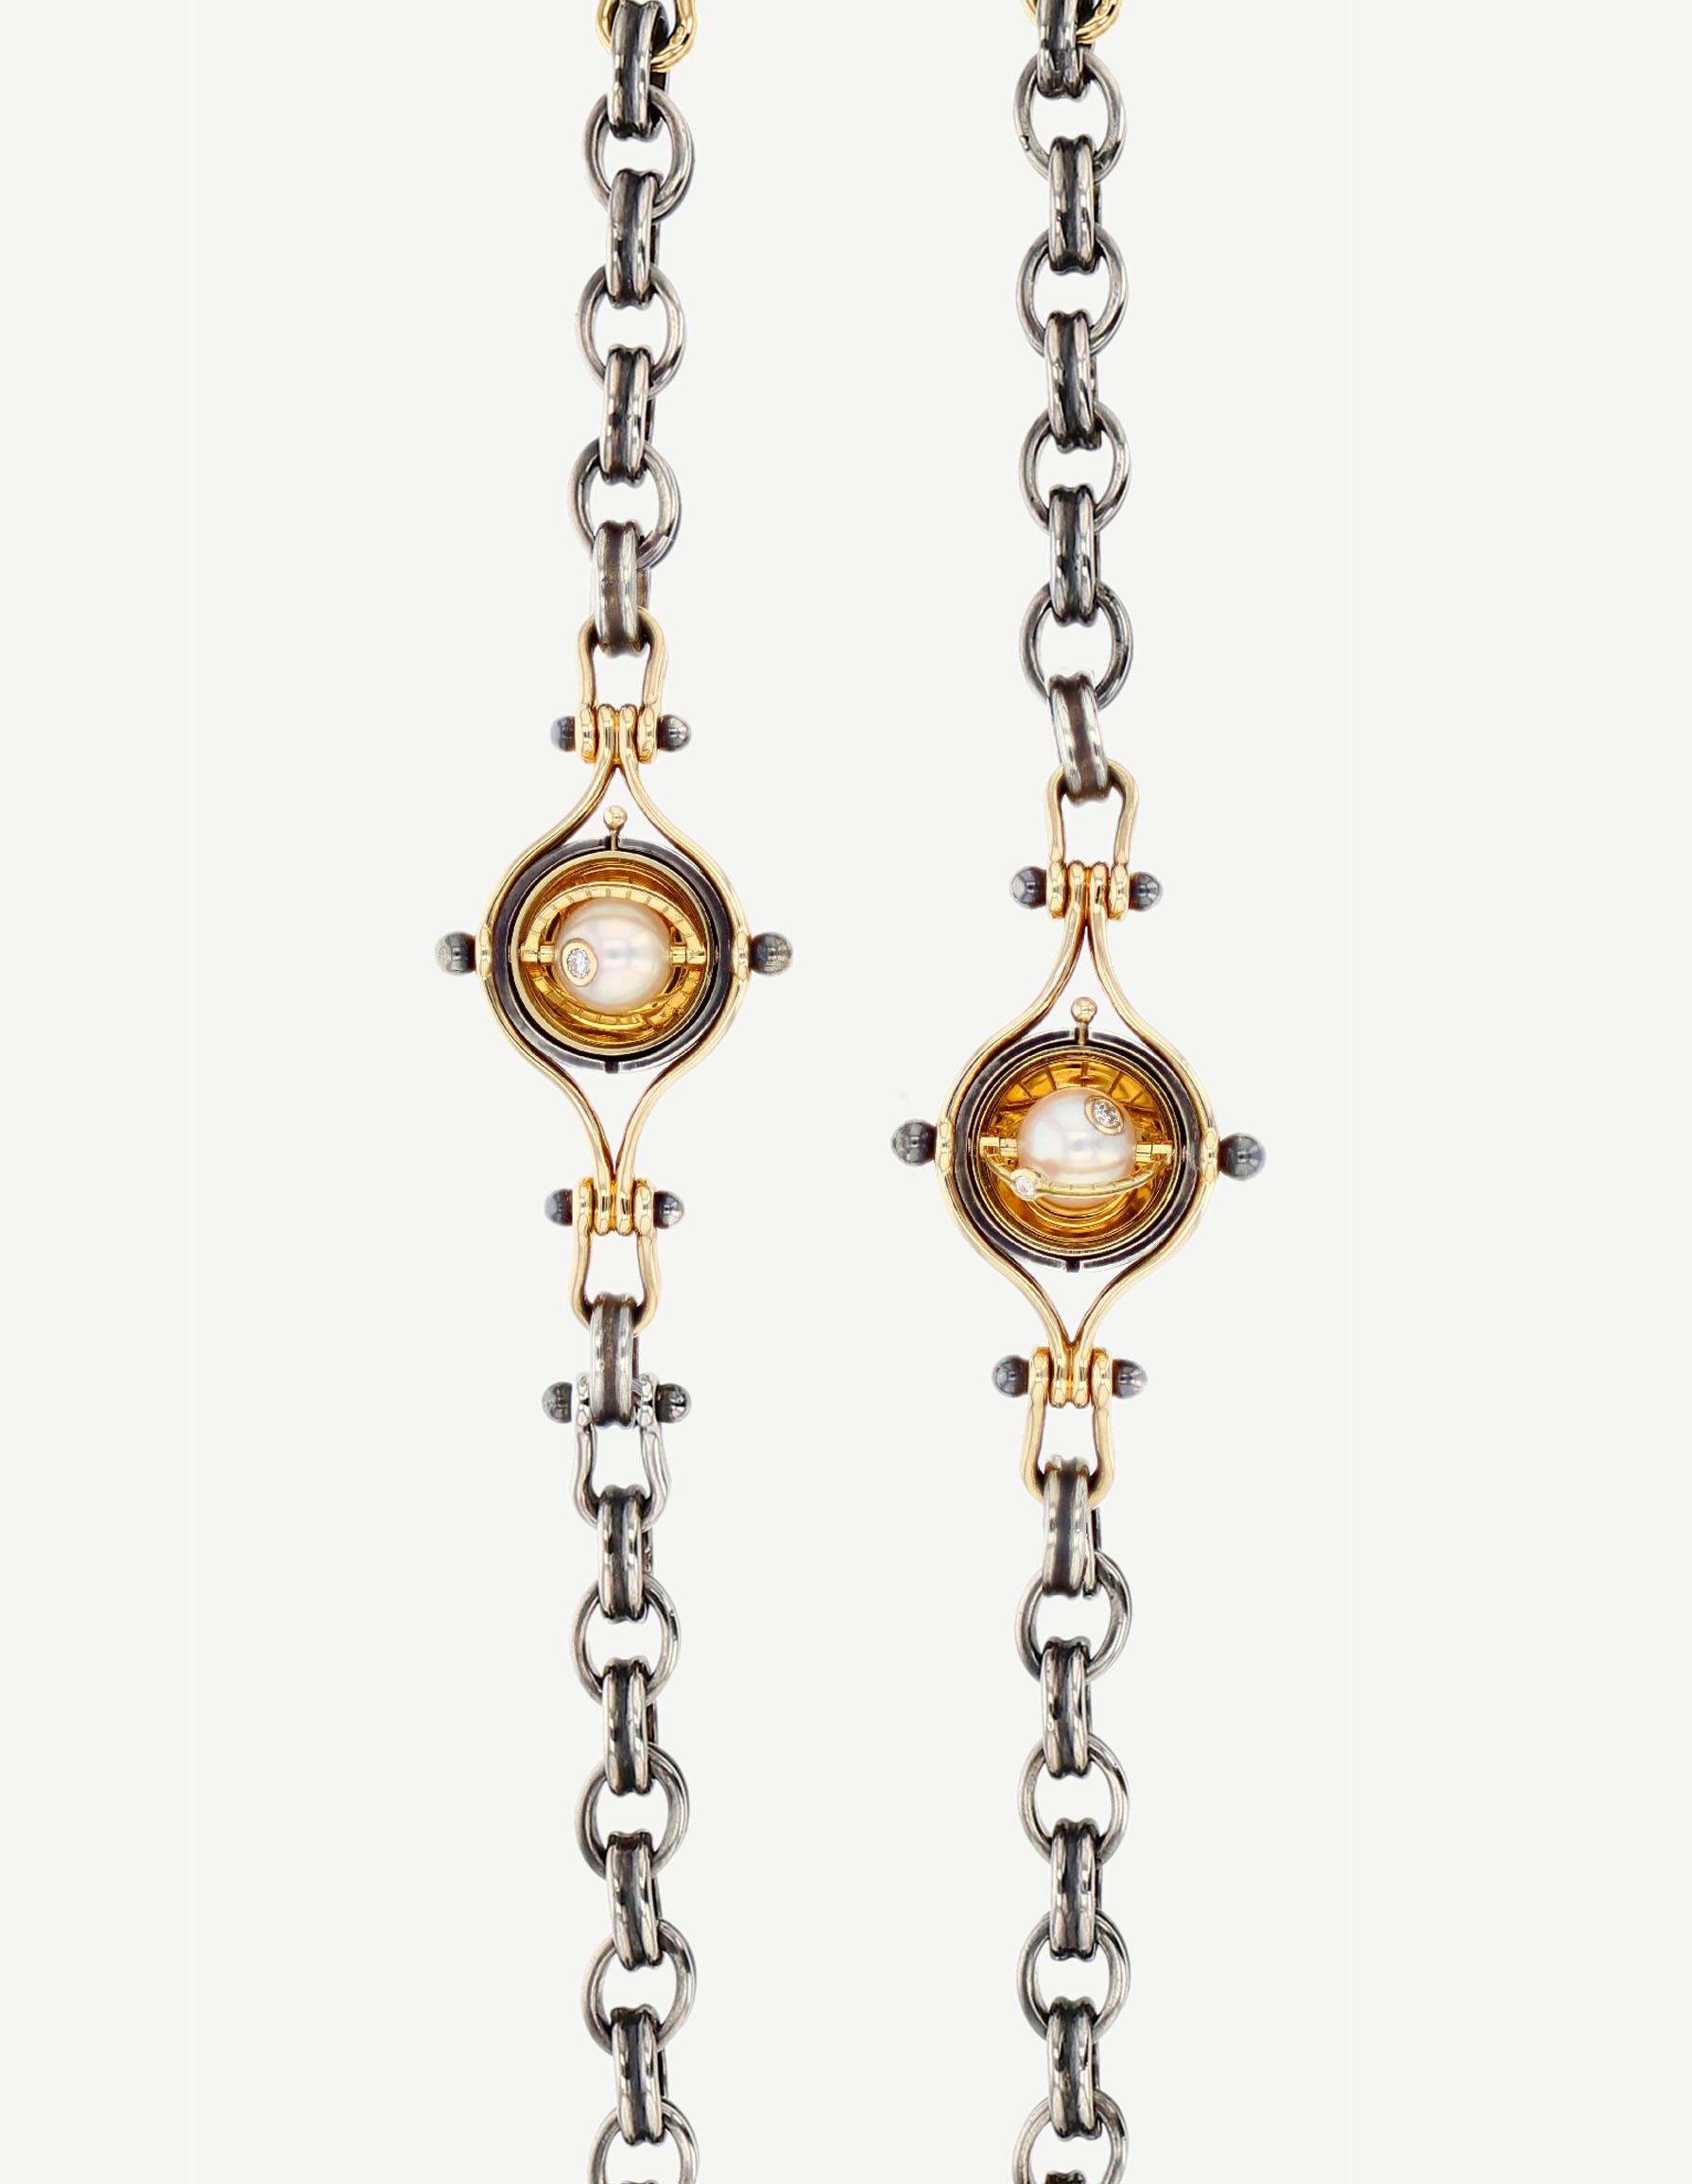 Pendant chain necklace made from distressed silver. Rotating spheres opening on an akoya pearl circled with a yellow gold satellite and diamond.